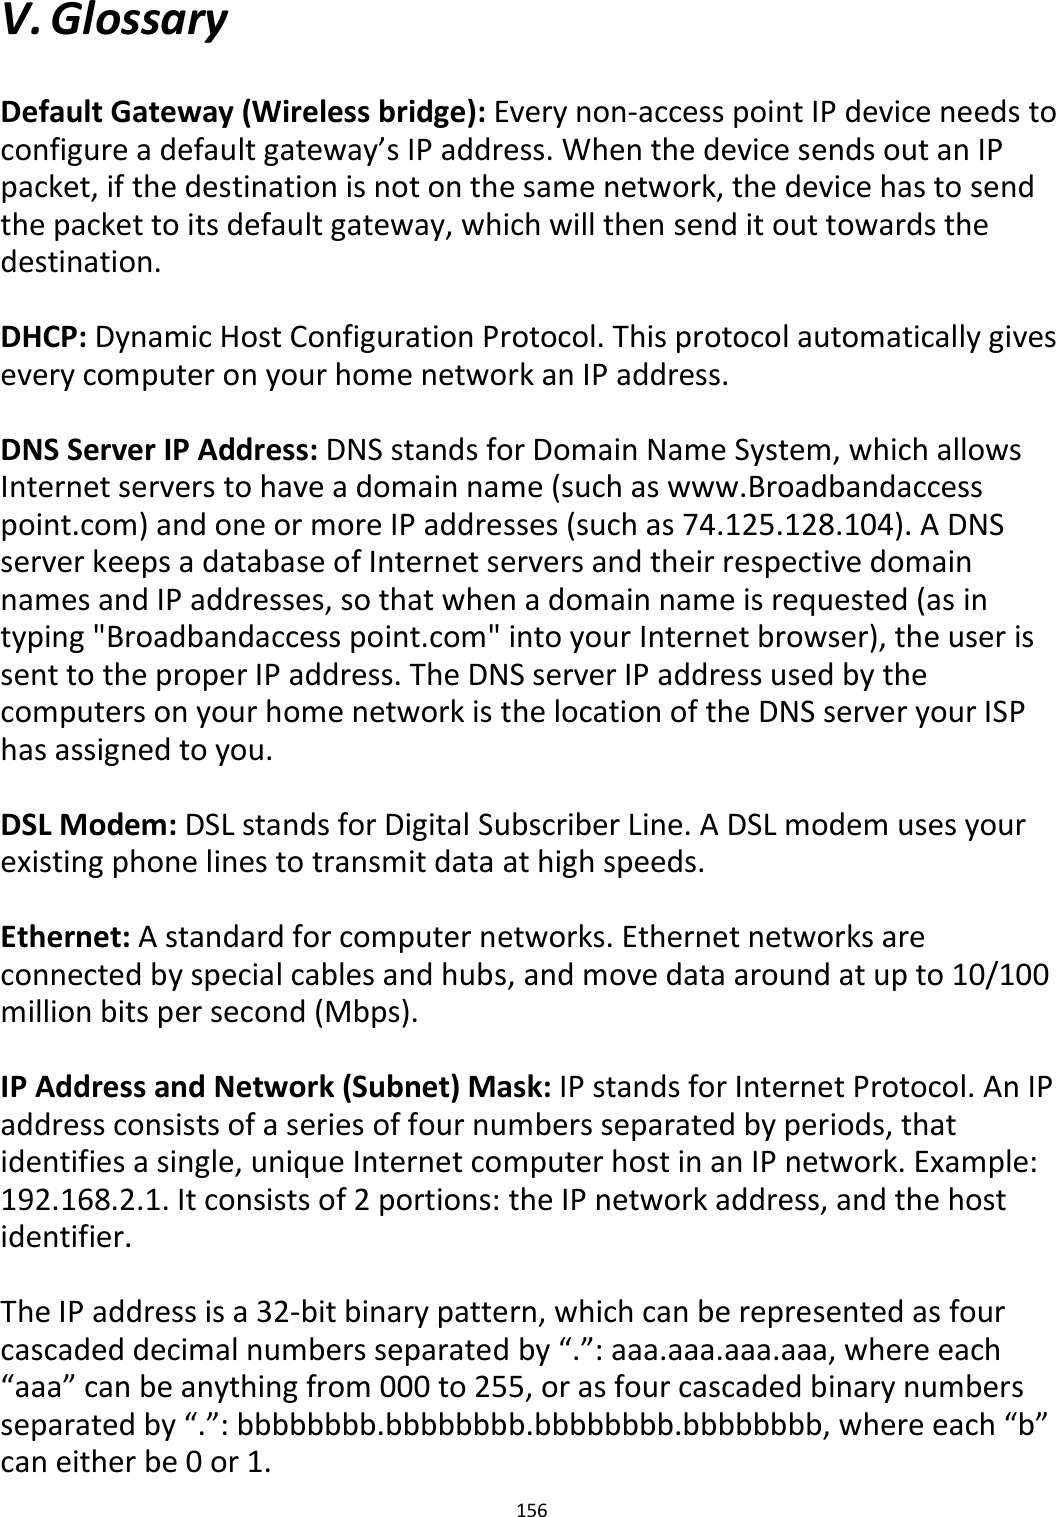 156   V. Glossary  Default Gateway (Wireless bridge): Every non-access point IP device needs to configure a default gateway’s IP address. When the device sends out an IP packet, if the destination is not on the same network, the device has to send the packet to its default gateway, which will then send it out towards the destination.  DHCP: Dynamic Host Configuration Protocol. This protocol automatically gives every computer on your home network an IP address.  DNS Server IP Address: DNS stands for Domain Name System, which allows Internet servers to have a domain name (such as www.Broadbandaccess point.com) and one or more IP addresses (such as 74.125.128.104). A DNS server keeps a database of Internet servers and their respective domain names and IP addresses, so that when a domain name is requested (as in typing &quot;Broadbandaccess point.com&quot; into your Internet browser), the user is sent to the proper IP address. The DNS server IP address used by the computers on your home network is the location of the DNS server your ISP has assigned to you.  DSL Modem: DSL stands for Digital Subscriber Line. A DSL modem uses your existing phone lines to transmit data at high speeds.   Ethernet: A standard for computer networks. Ethernet networks are connected by special cables and hubs, and move data around at up to 10/100 million bits per second (Mbps).  IP Address and Network (Subnet) Mask: IP stands for Internet Protocol. An IP address consists of a series of four numbers separated by periods, that identifies a single, unique Internet computer host in an IP network. Example: 192.168.2.1. It consists of 2 portions: the IP network address, and the host identifier.  The IP address is a 32-bit binary pattern, which can be represented as four cascaded decimal numbers separated by “.”: aaa.aaa.aaa.aaa, where each “aaa” can be anything from 000 to 255, or as four cascaded binary numbers separated by “.”: bbbbbbbb.bbbbbbbb.bbbbbbbb.bbbbbbbb, where each “b” can either be 0 or 1. 